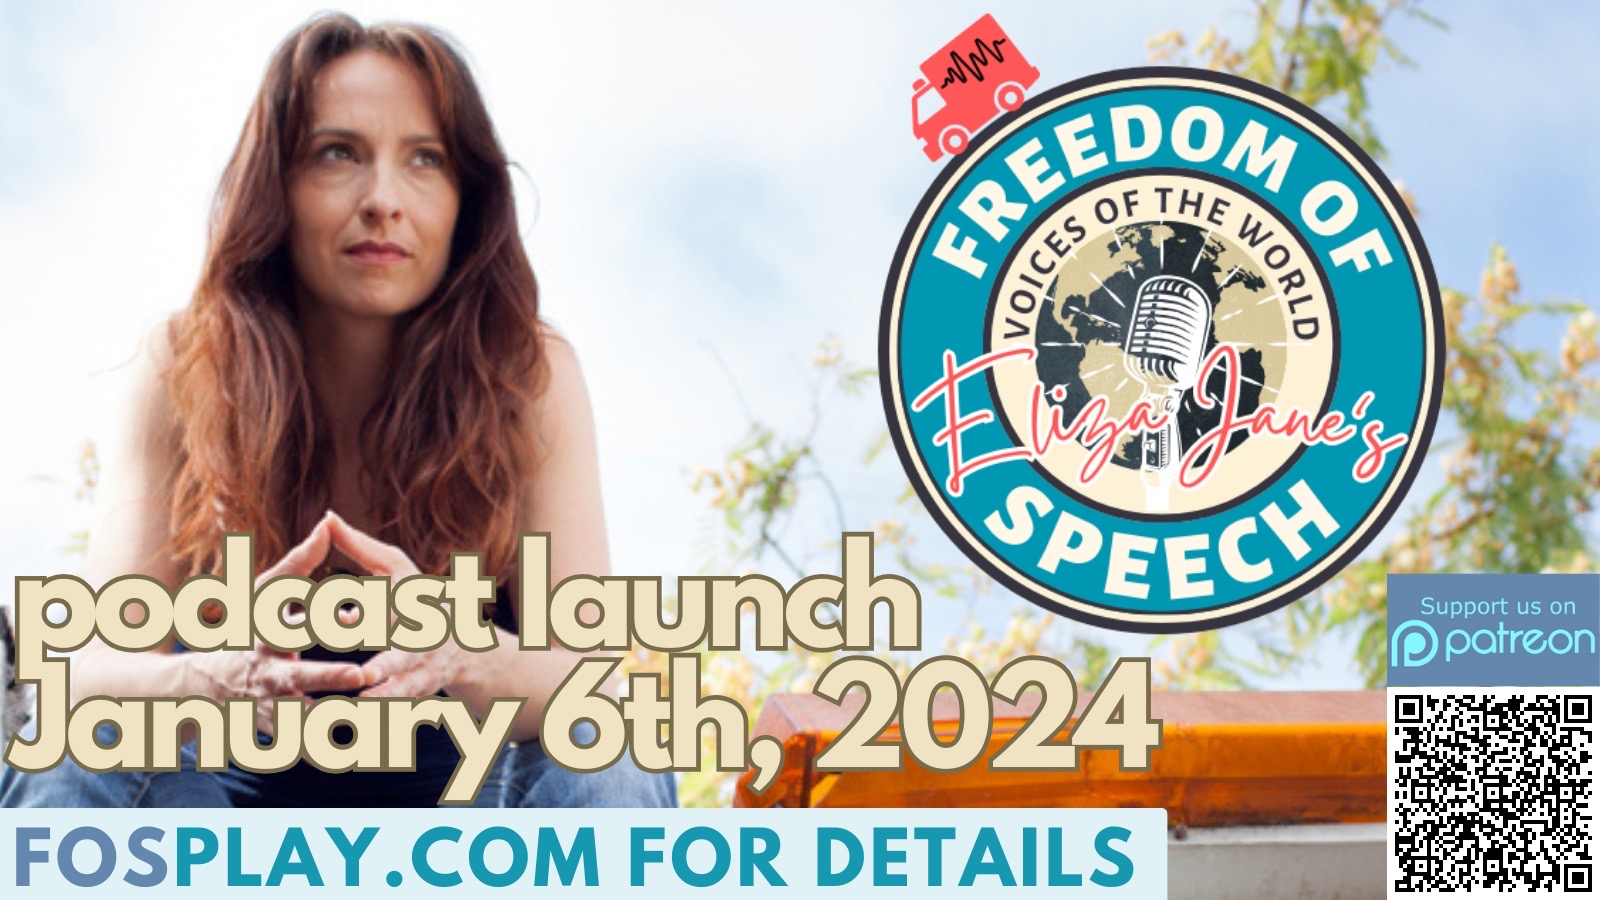 South Park Star Eliza Jane Schneider’s New Podcast and Award Winning Live Performance "Freedom of Speech" Set for a Diverse Launch and Vibrant Community Panel in Portland on January 6th